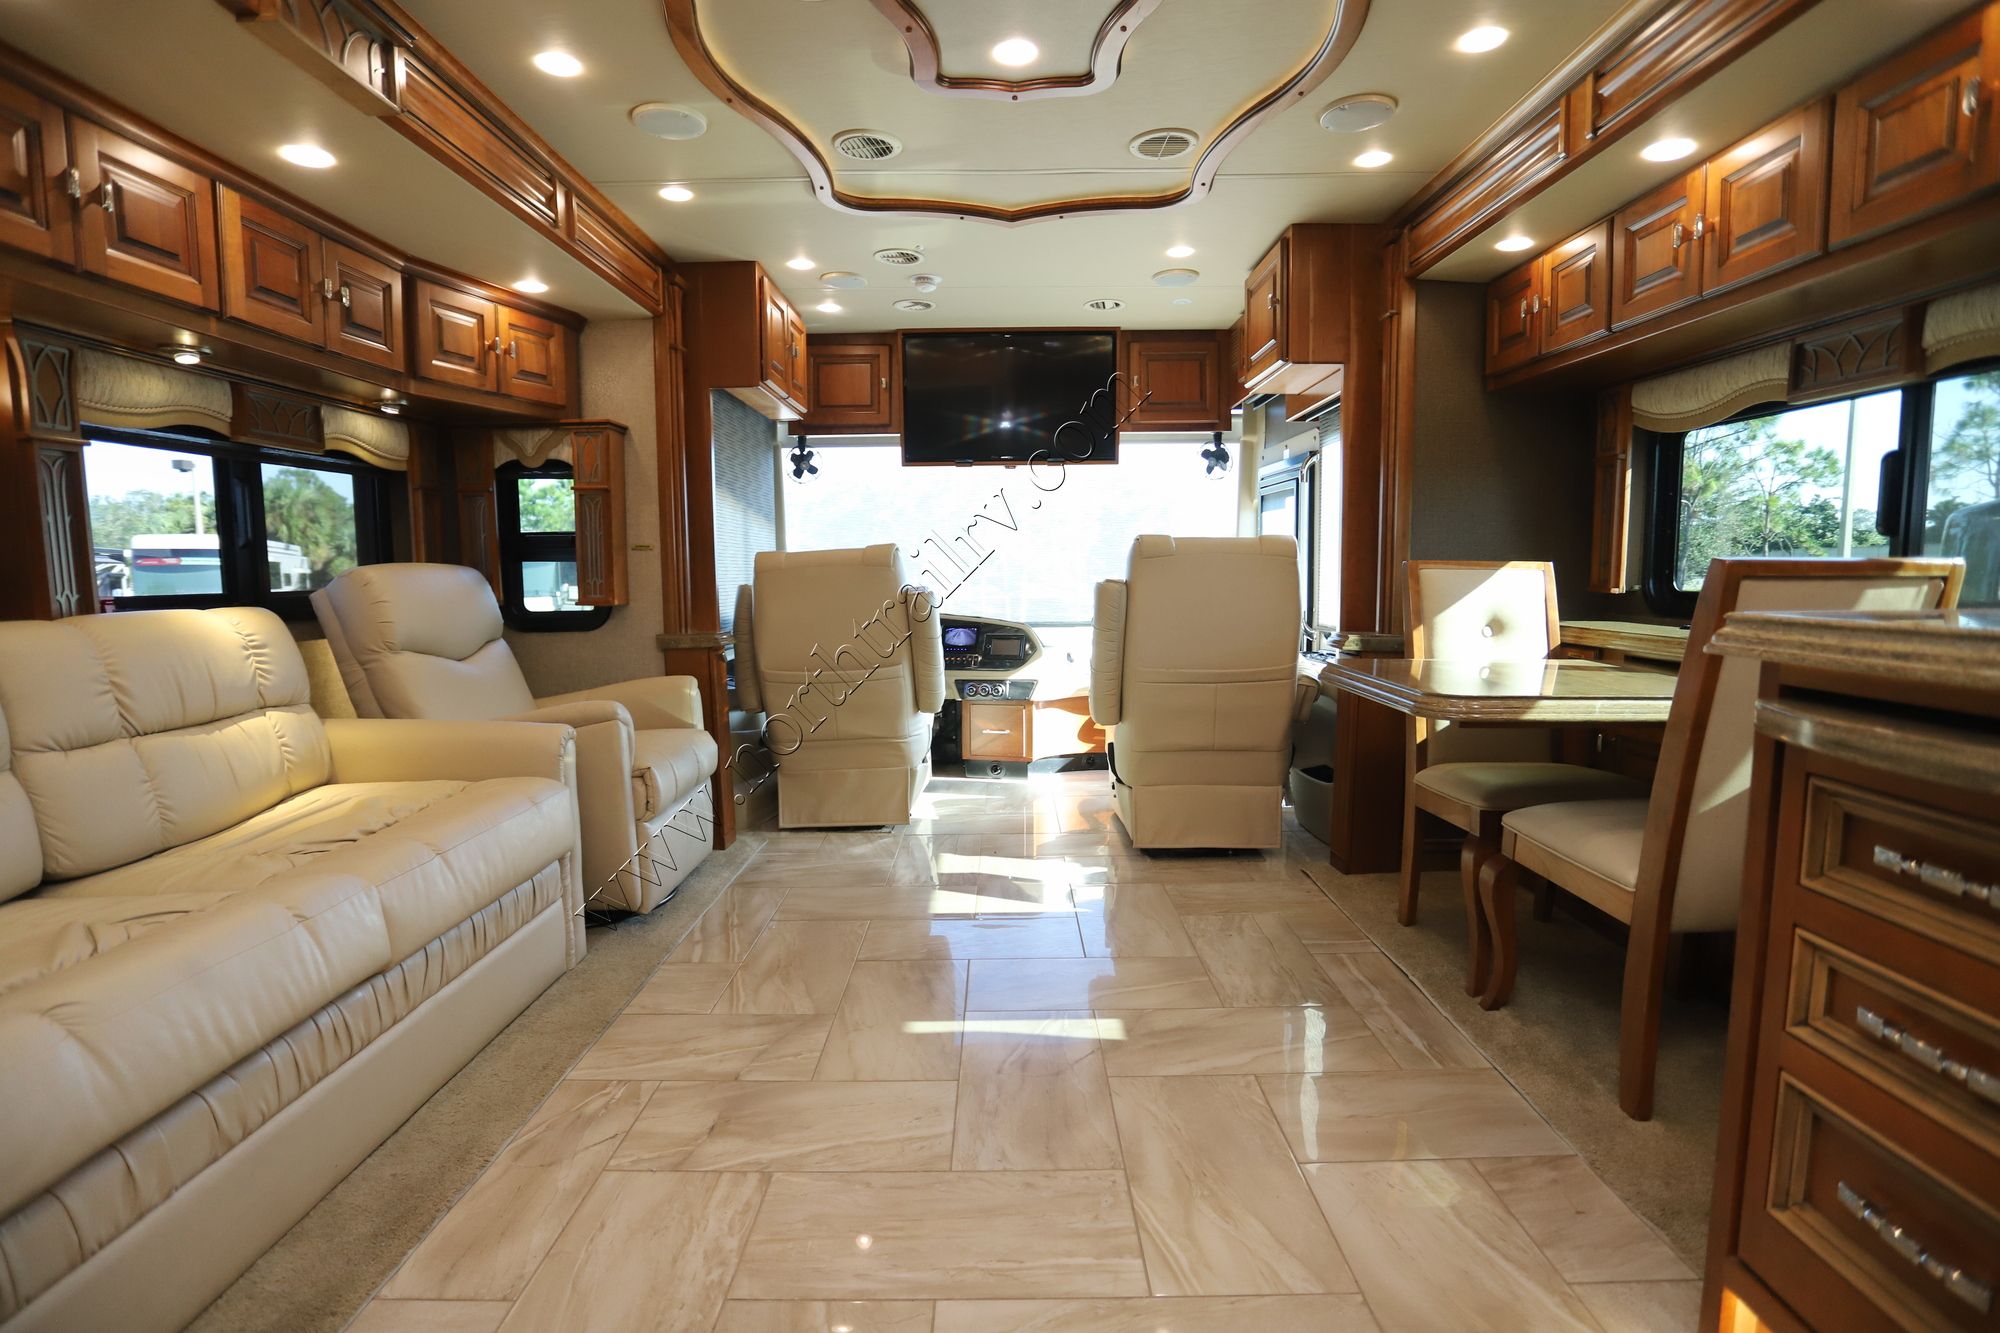 Used 2017 Tiffin Motor Homes Allegro Bus 40AP Class A  For Sale